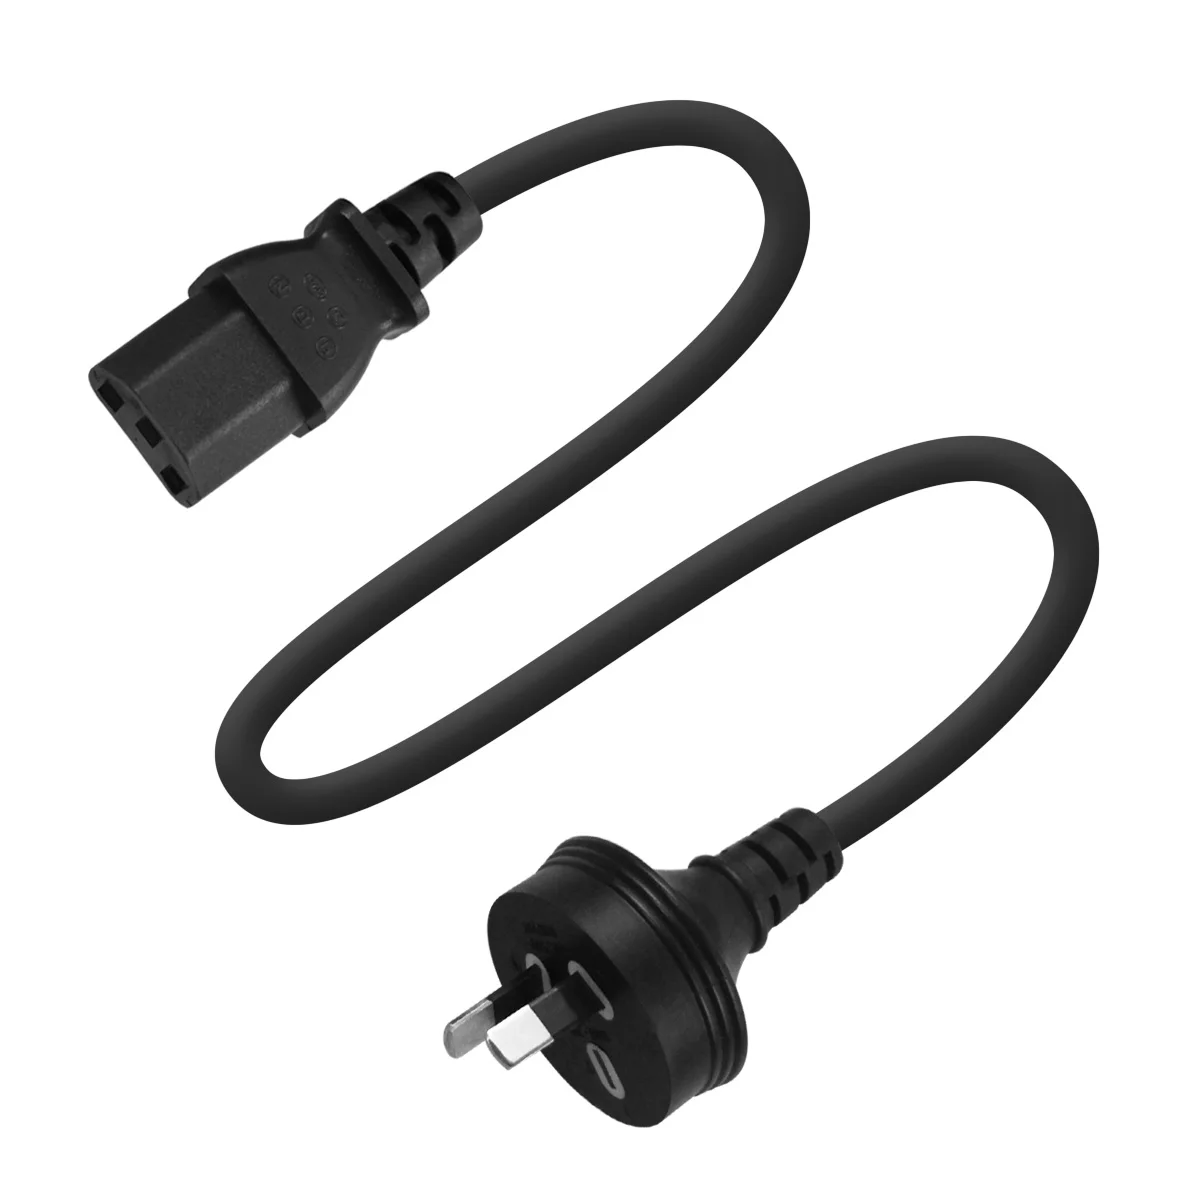 Approved AS / NZS 3112 Standard Australian 10A 250V 3 Pin Mains Lead with New Zealan Plug to Female IEC C13 Britain power cord